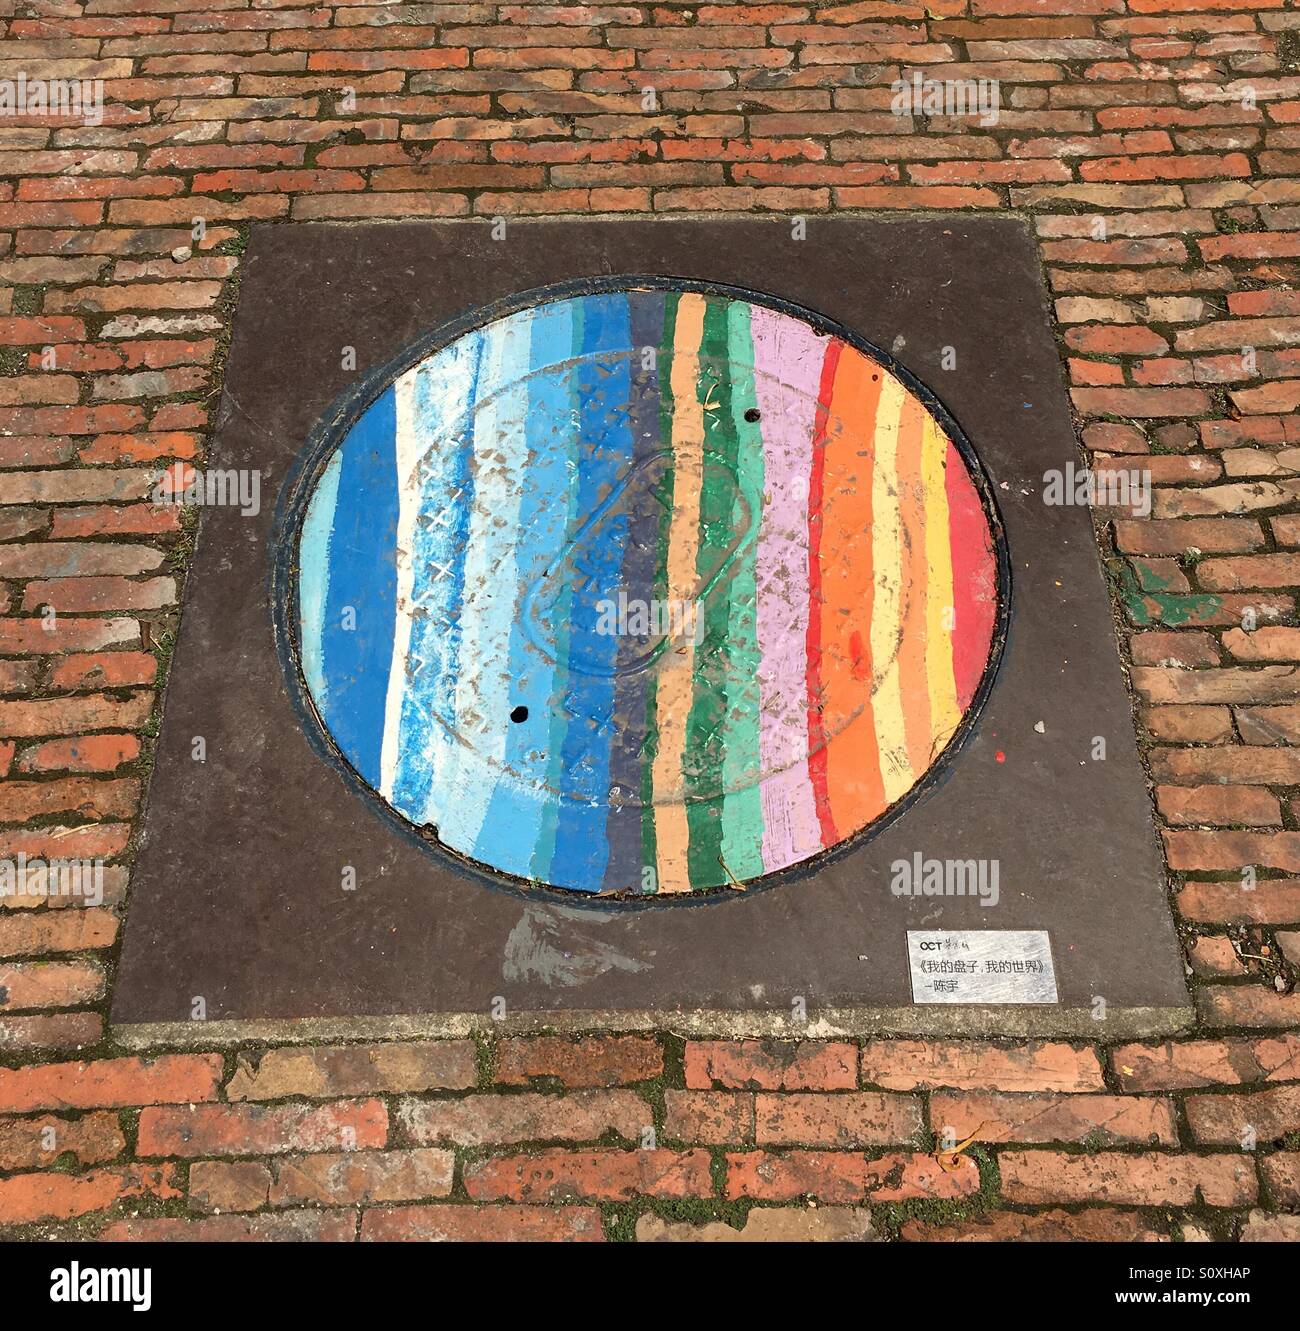 Manhole Cover Painted in Rainbow Colours - Shenzhen, China Stock Photo